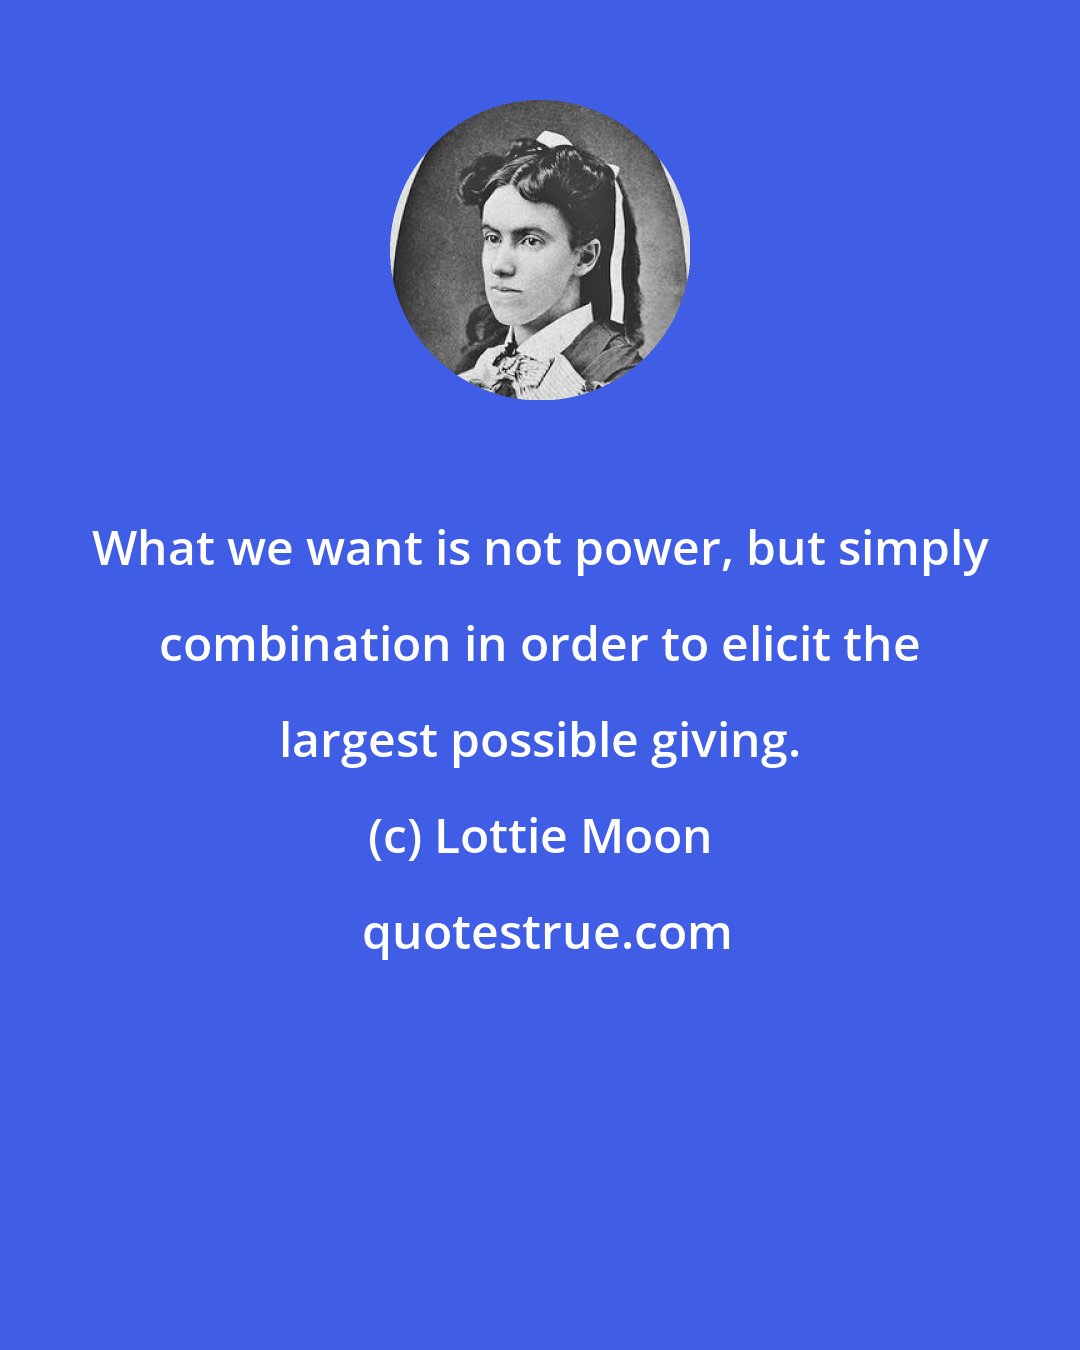 Lottie Moon: What we want is not power, but simply combination in order to elicit the largest possible giving.